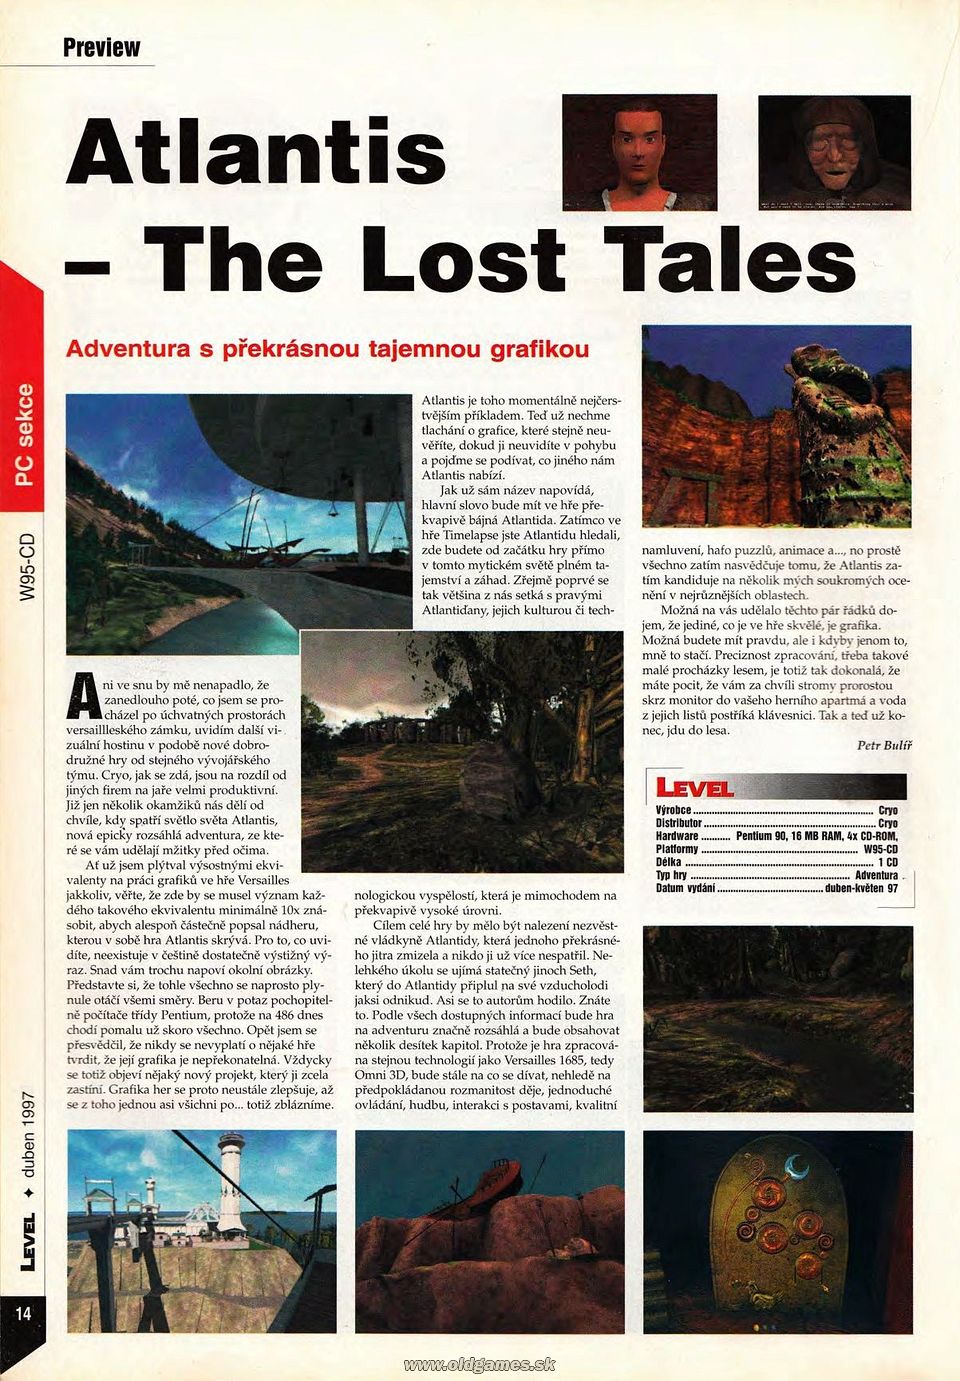 Preview: Atlantis - The Lost Tales